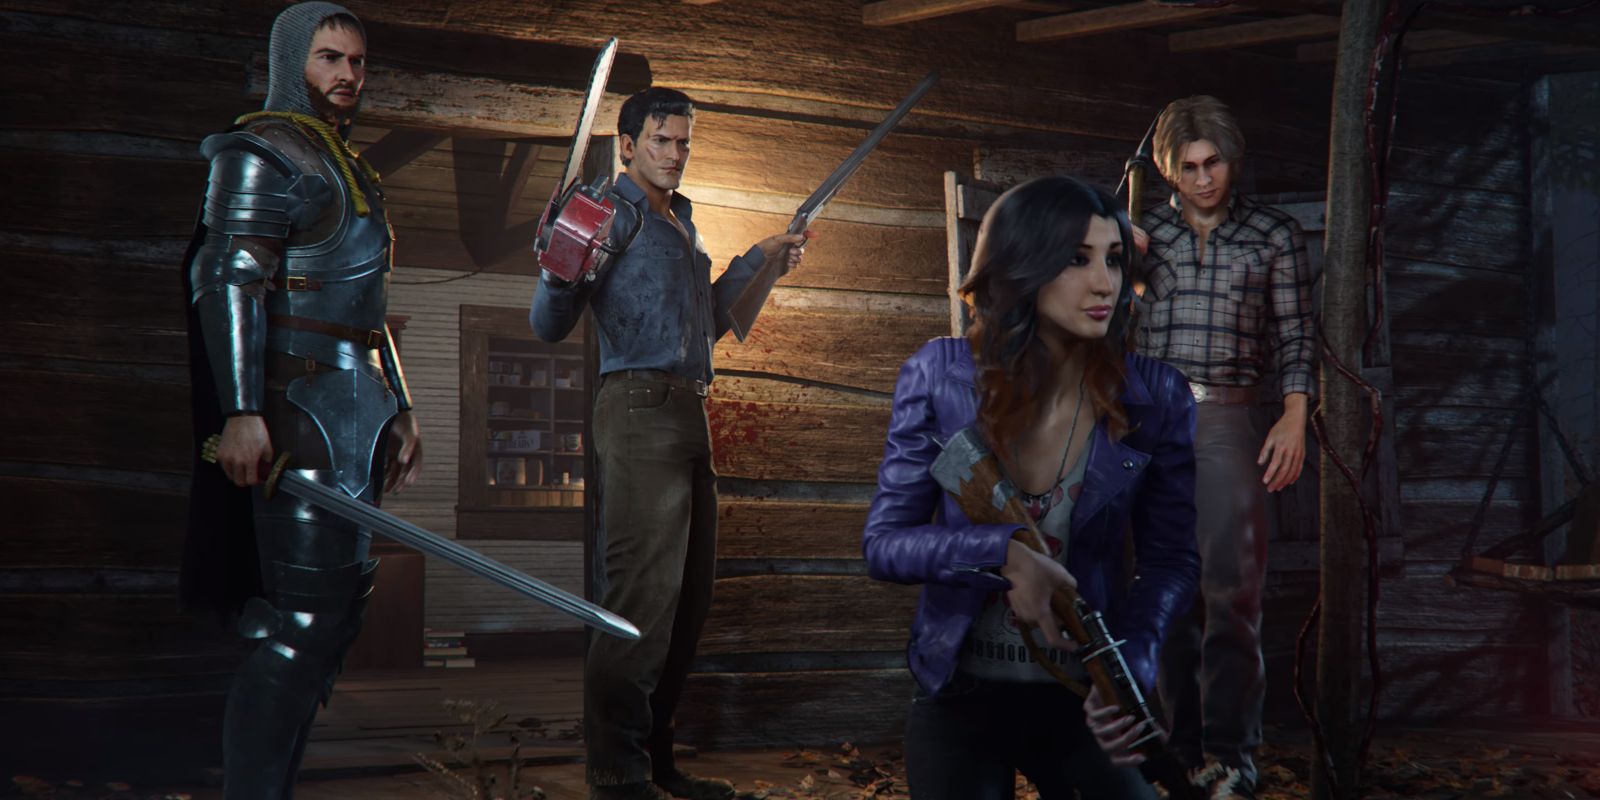 Evil Dead: The Game is your next horror multiplayer obsession